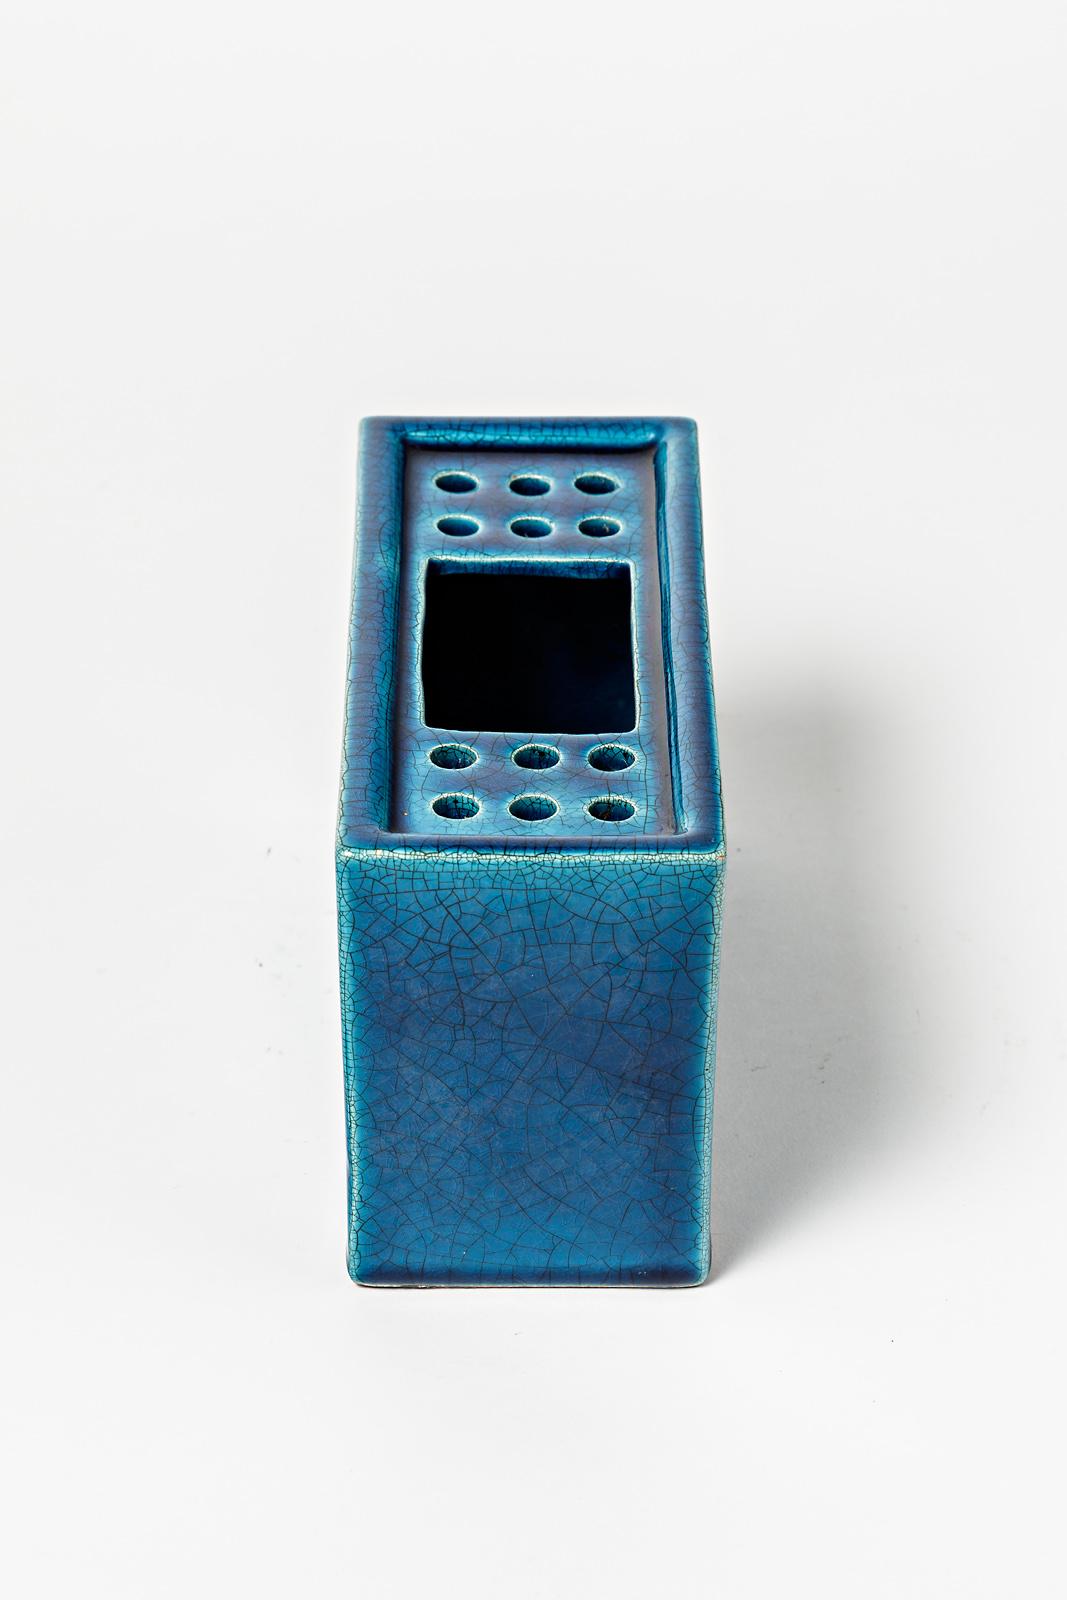 Mid-Century Modern Decorative Blue Ceramic Brick Flower Spike Vase 1950 Attributed to Pol Chambost For Sale